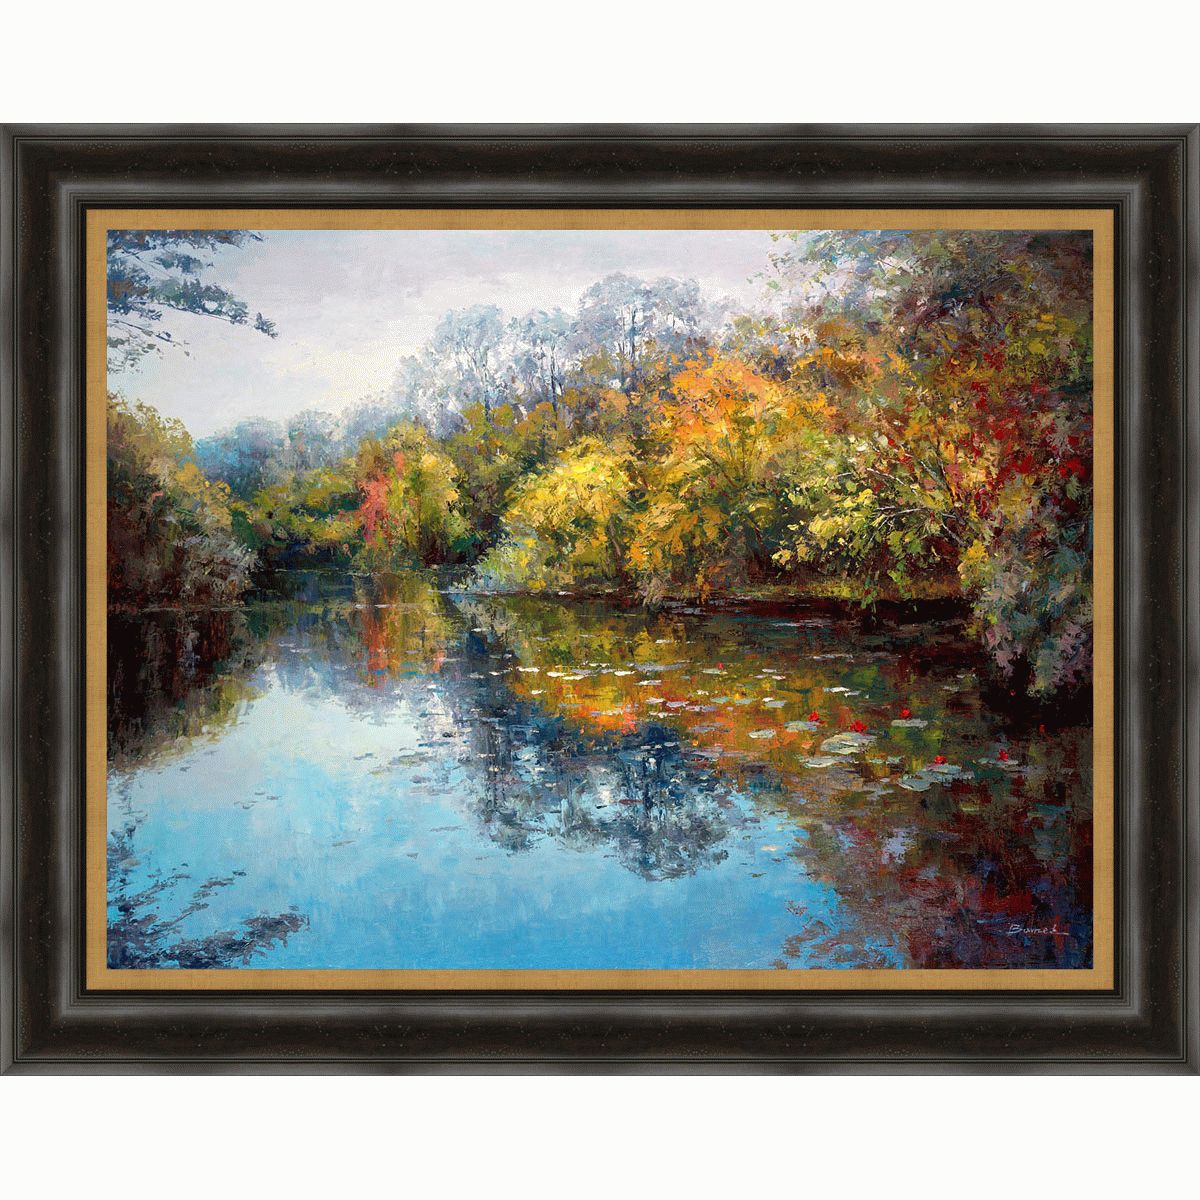 Autumn Pond Framed Wall Art Within Most Current Wall Framed Art Prints (View 20 of 20)